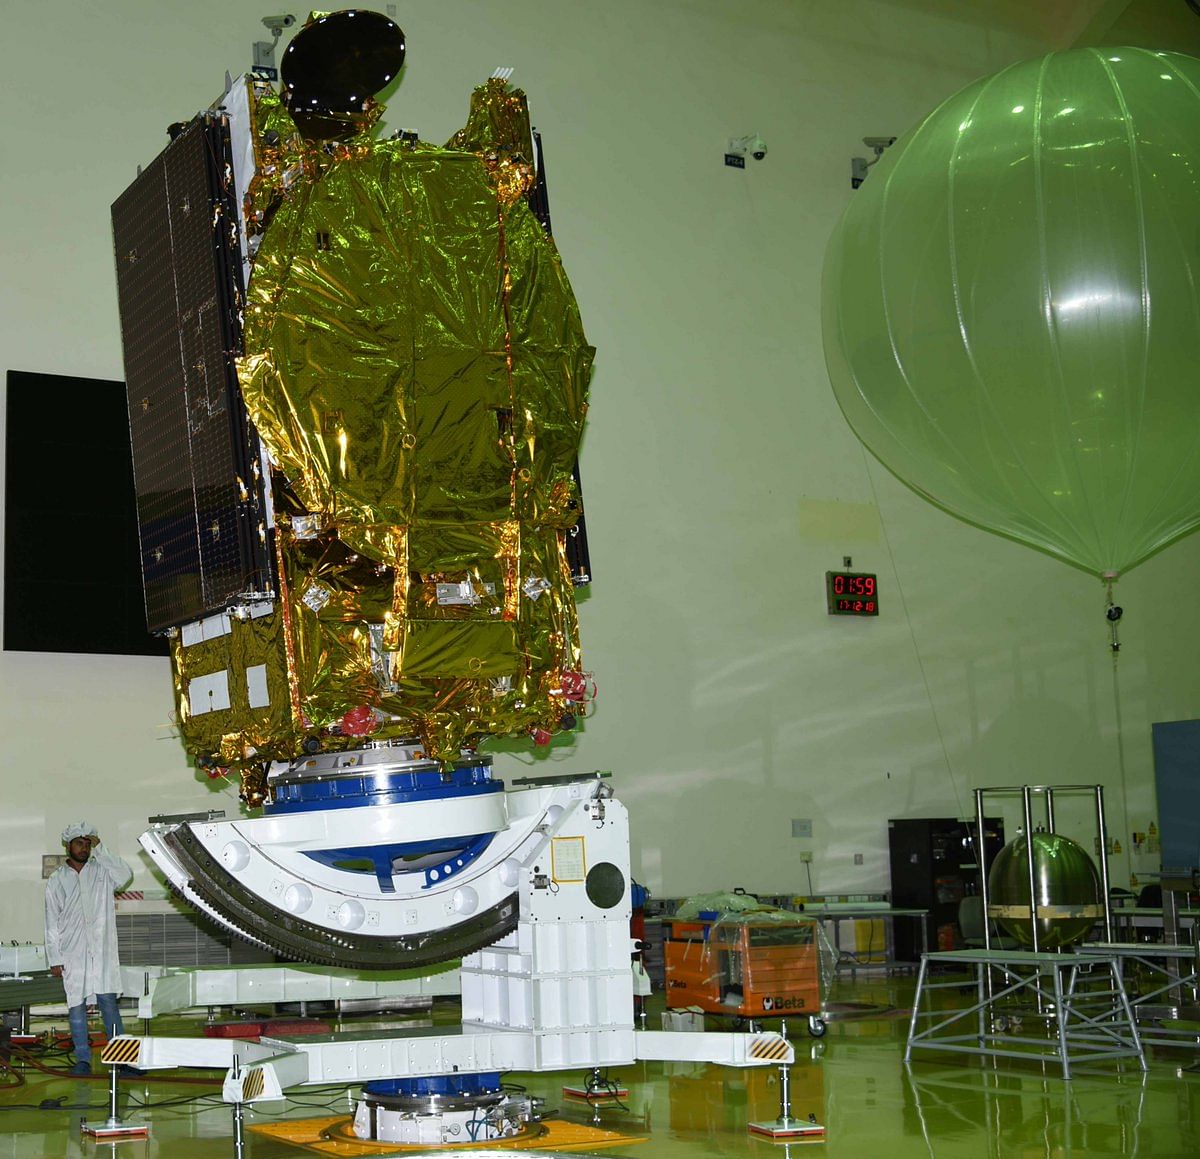 ISRO set to launch GSAT-31 on Feb 6 from French Guiana